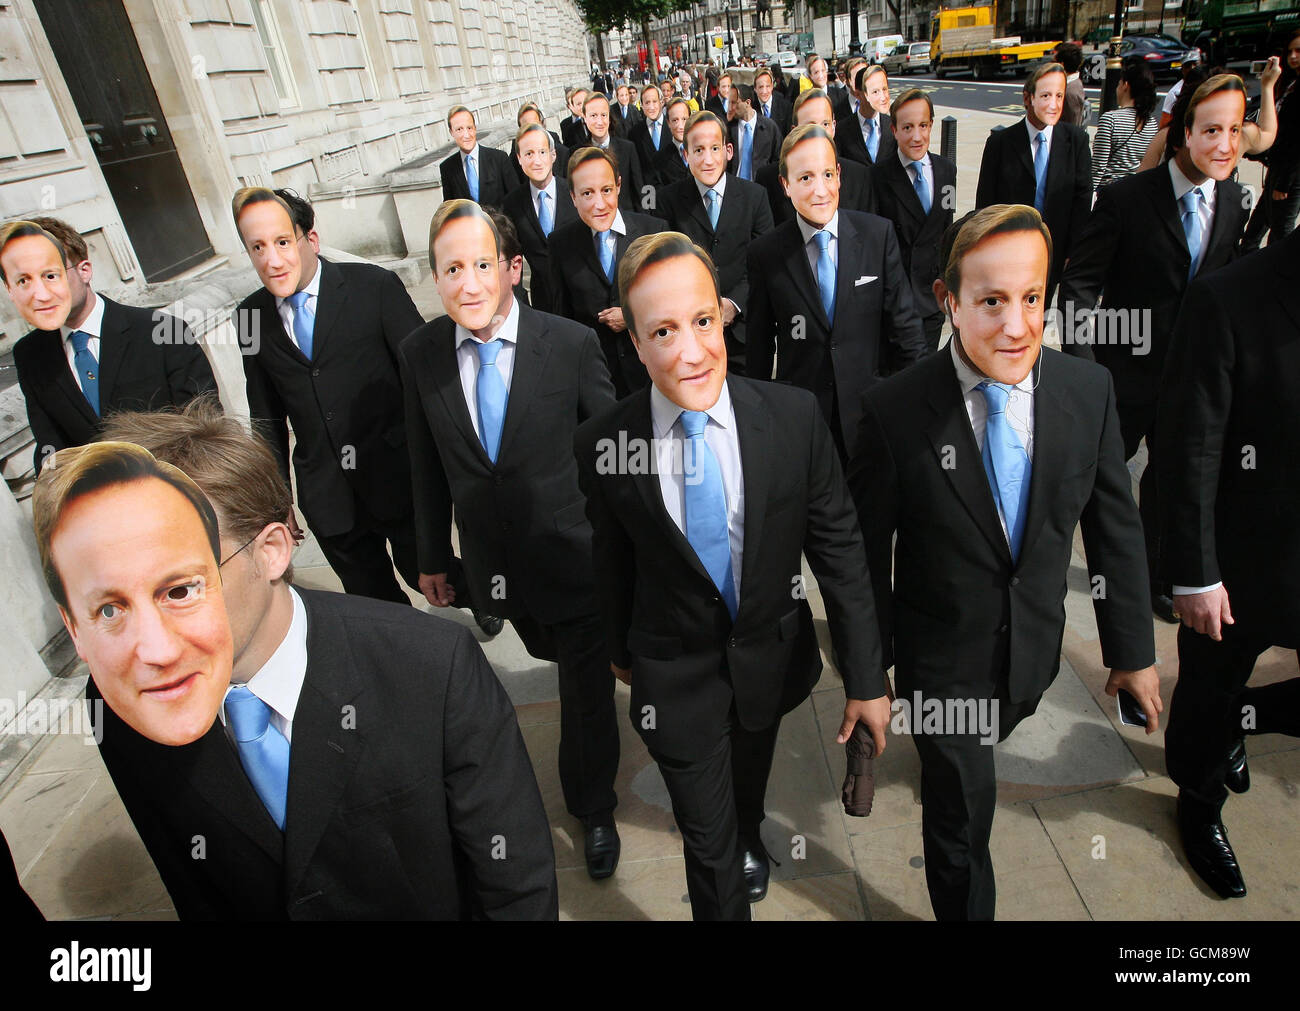 Protestors from Compassion in World Farming dress as clones of Prime Minister David Cameron, walk down Whitehall, in Westminster, London, as part of a demonstration against cloning animals for food production. Stock Photo